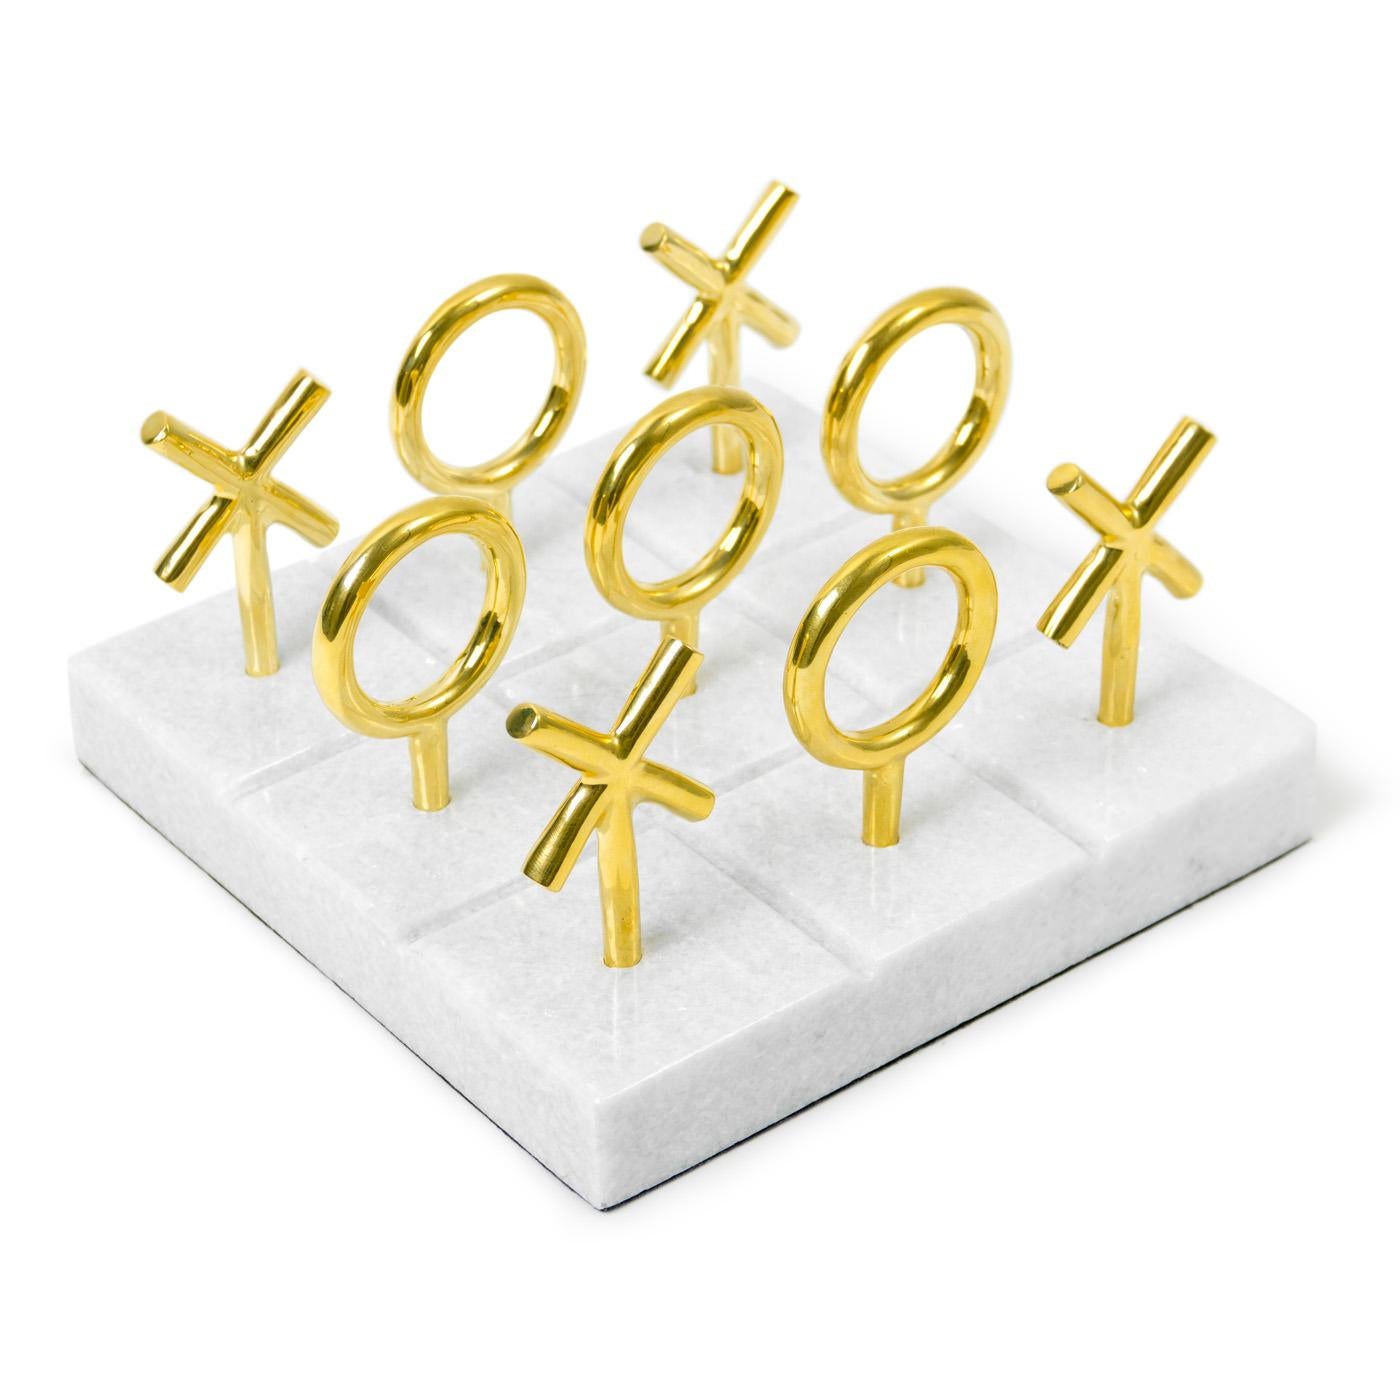 Raise your game. Play to win with our posh brass and marble Tic-Tac-Toe set. The grooved marble base is the perfect board for our sculptural brass playing pieces. Each piece in our collection of brass bibelots is designed and sculpted by Jonathan